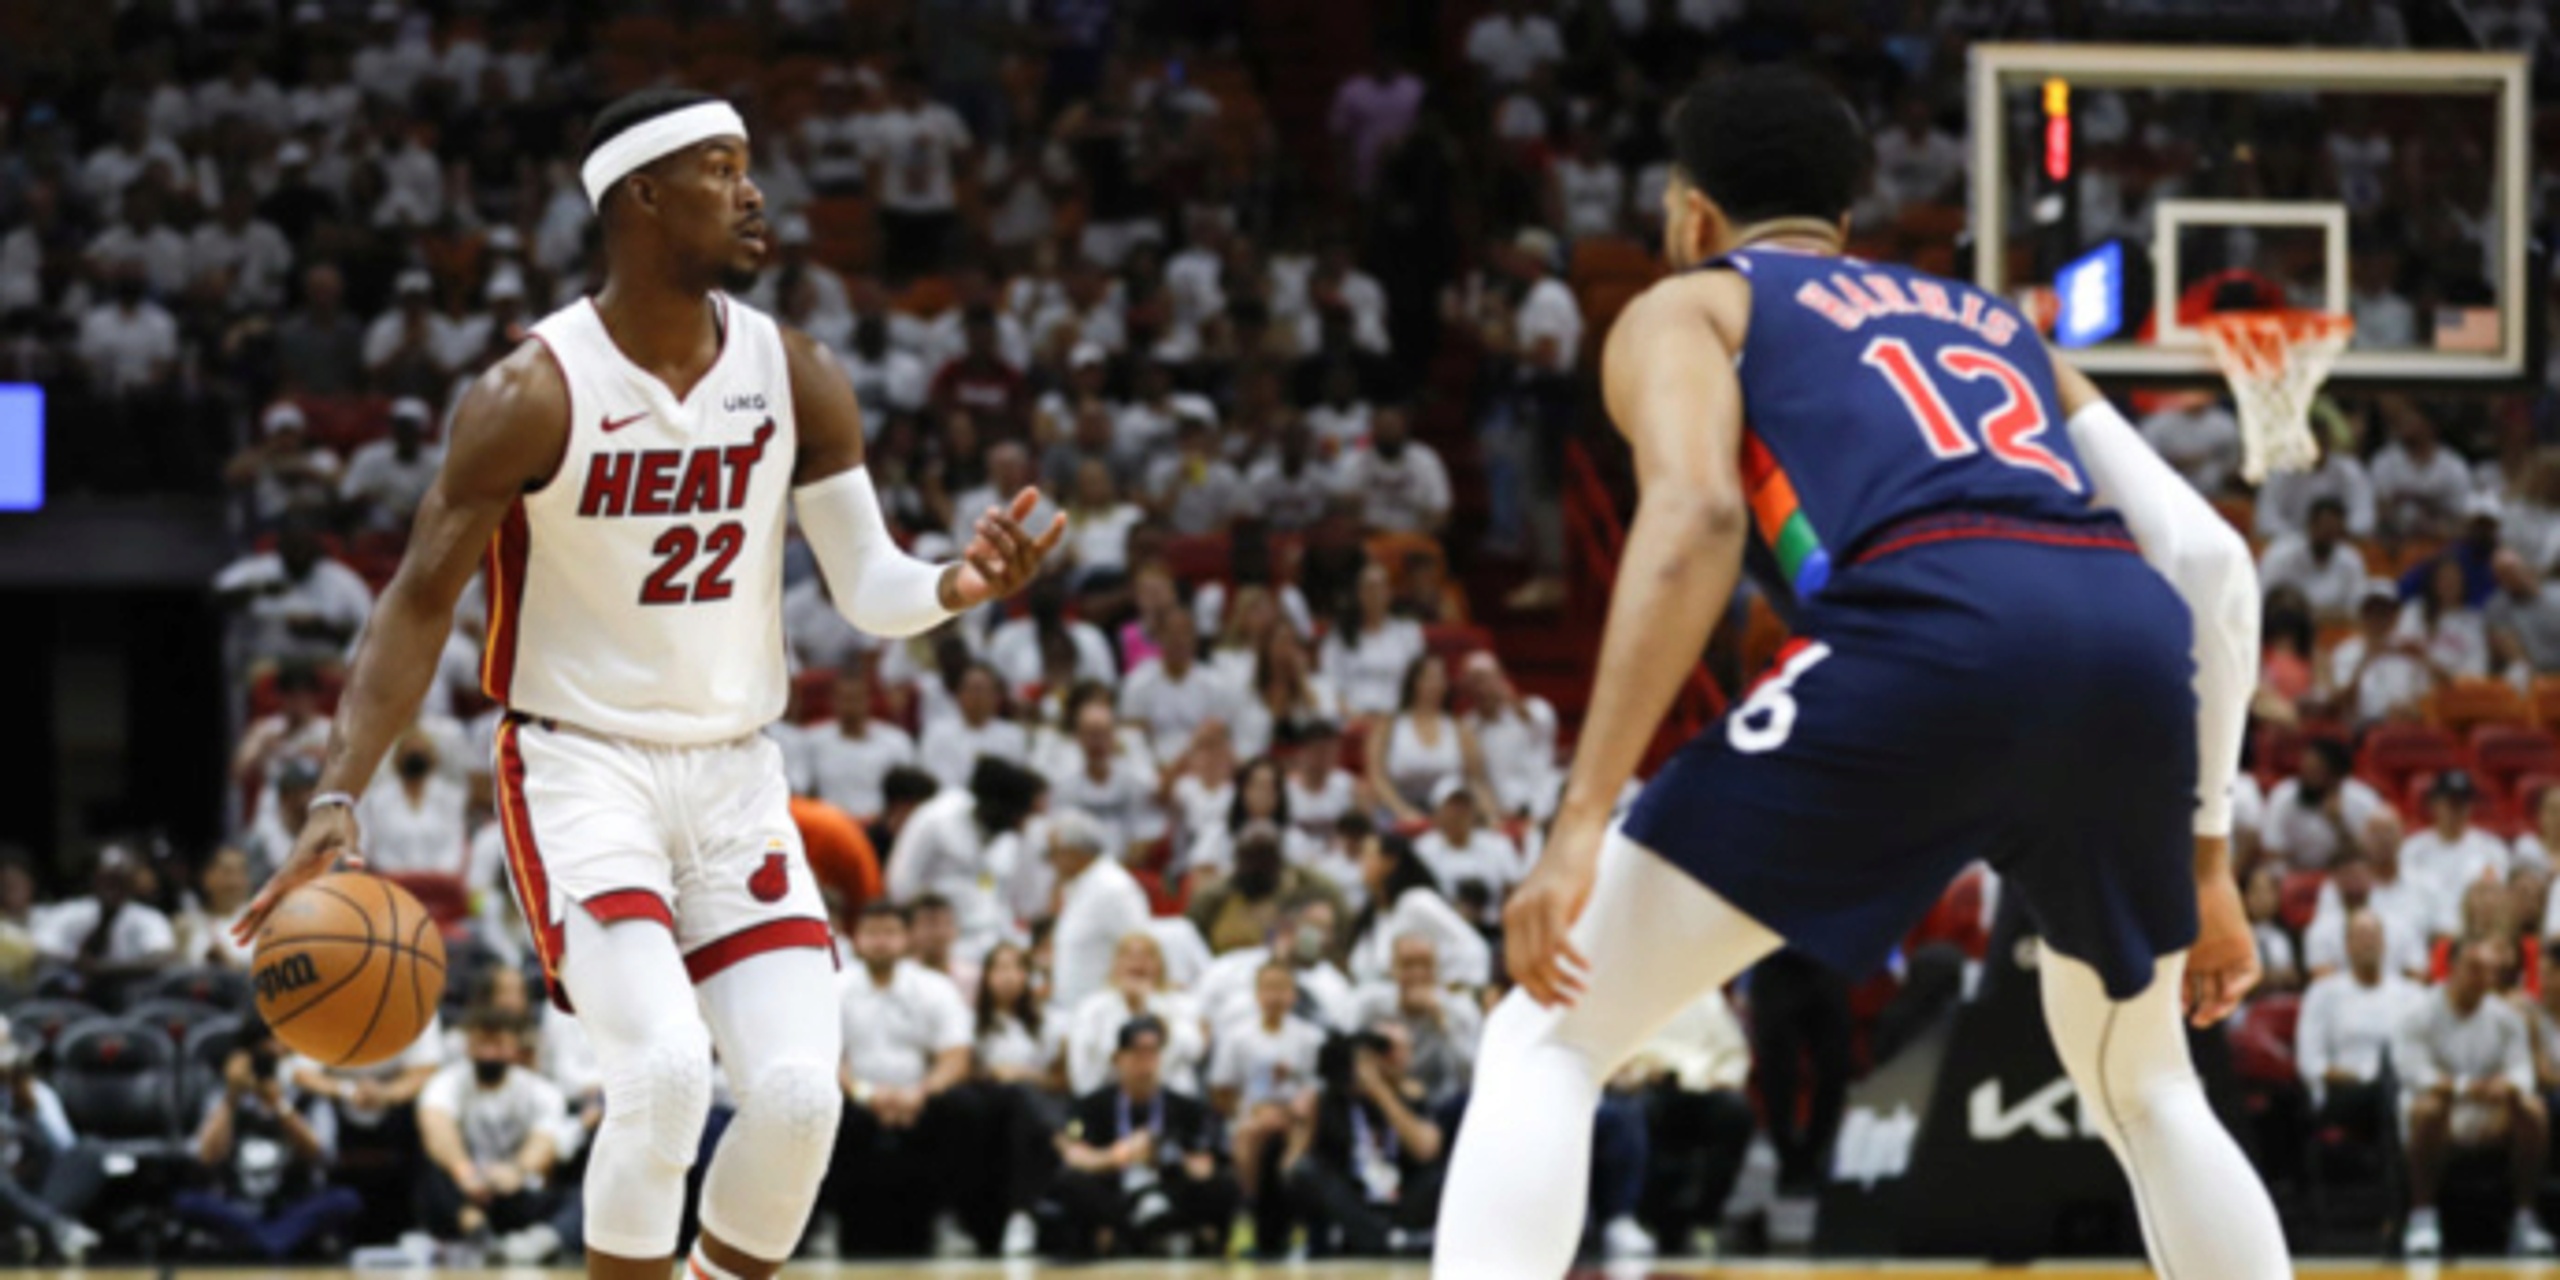 Emptying the clip: How the Heat torched the 76ers in pick-and-roll